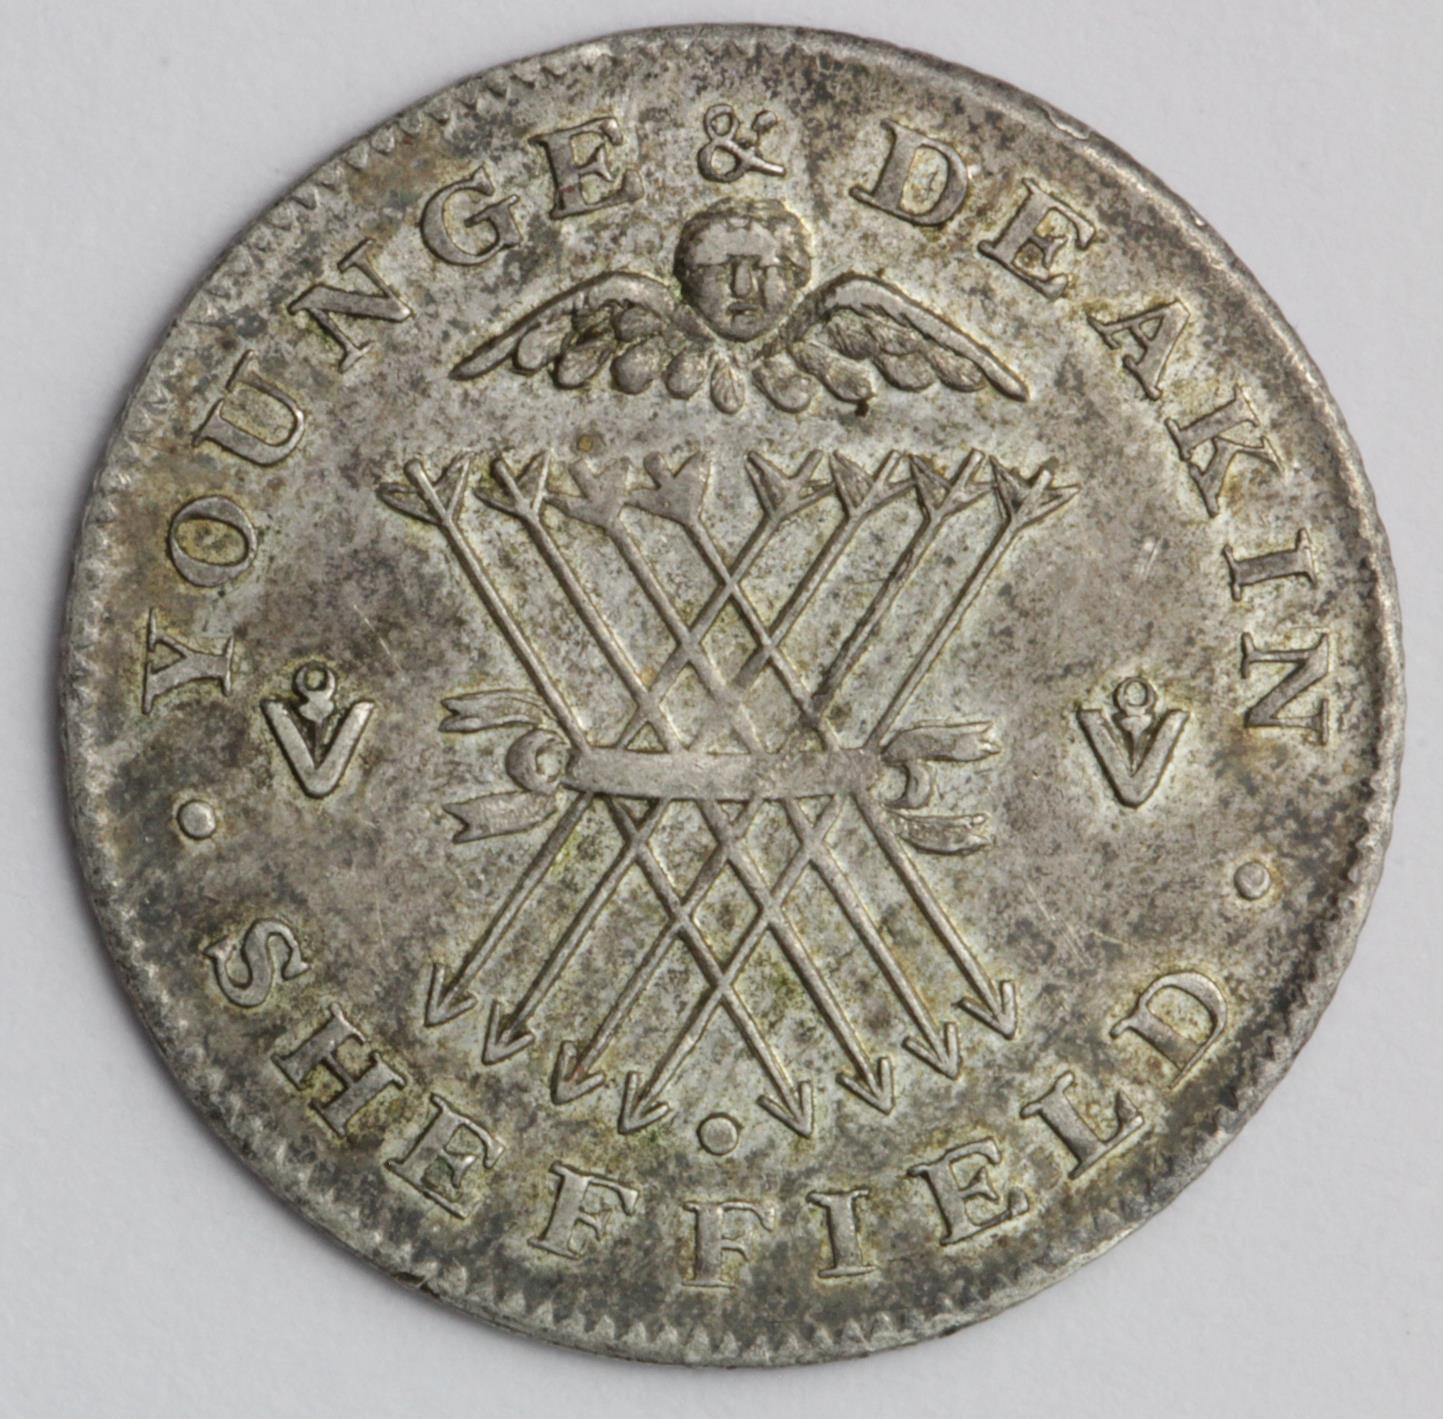 Token, 19thC : Sheffield silver sixpence of Young & Deakin 1811, patchy toned VF - Image 2 of 2